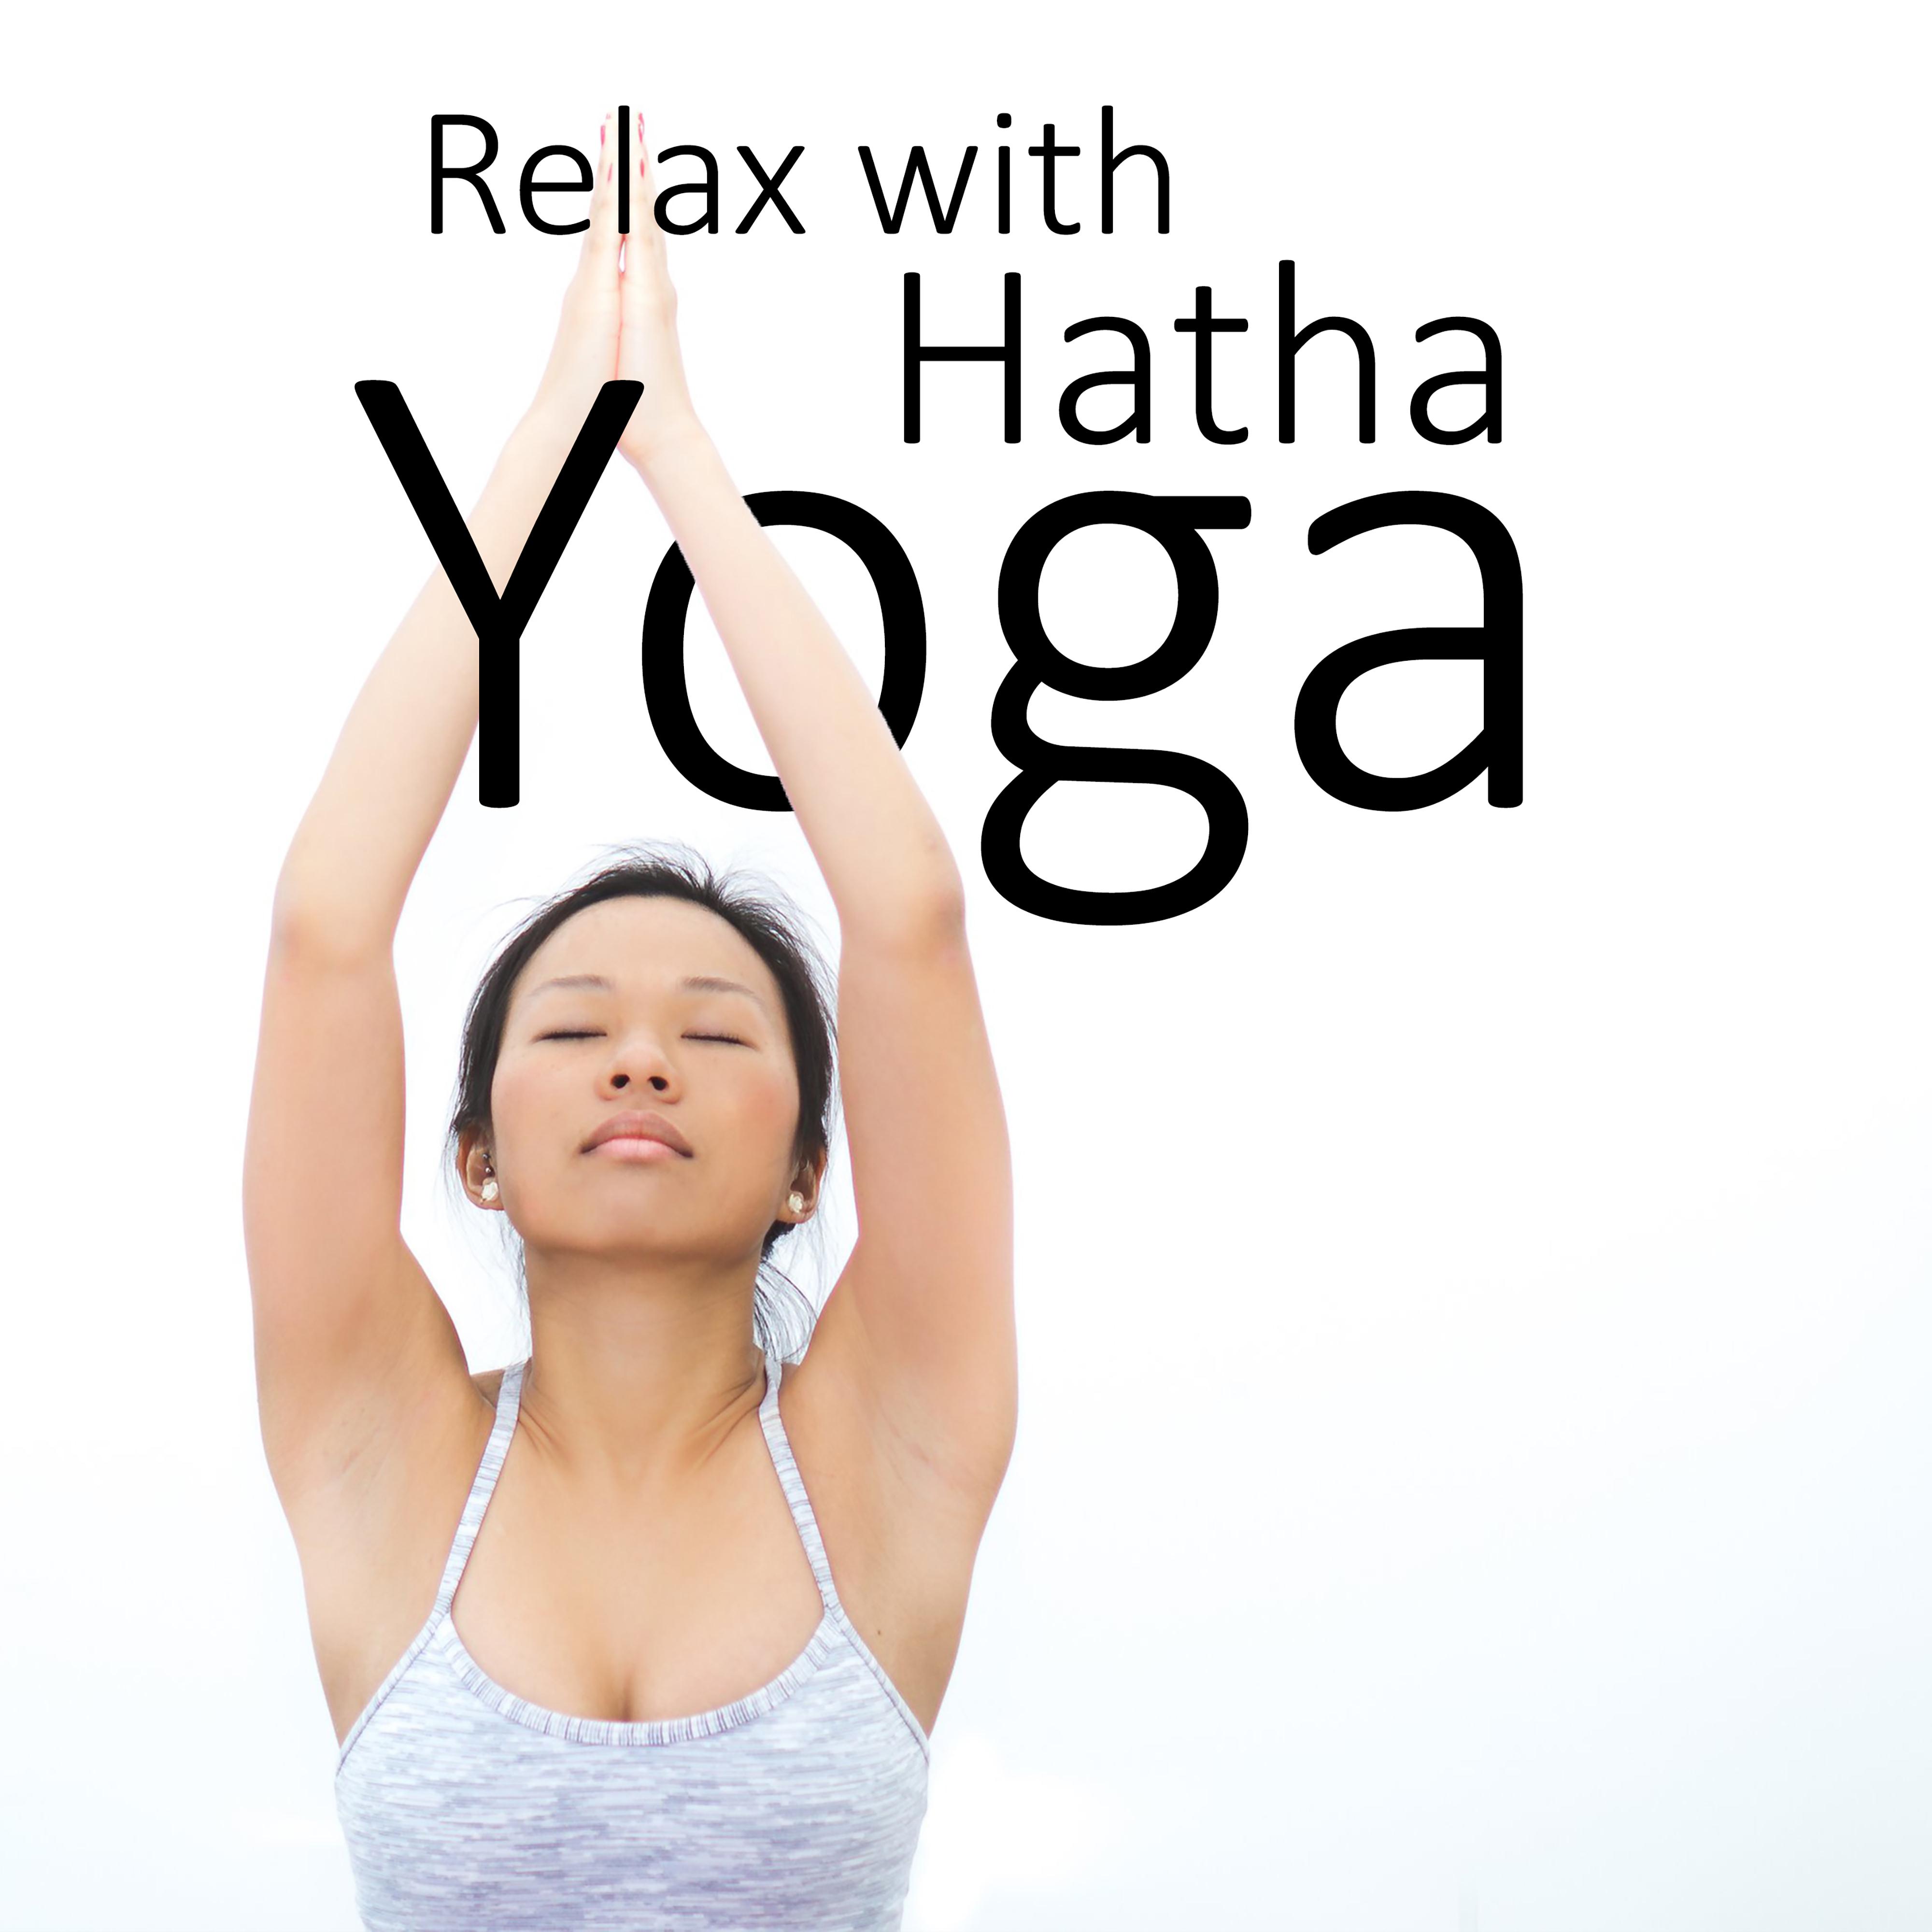 Relax with Hatha Yoga – Deep Meditation, Peaceful Nature Sounds Relieve Stress, Training Yoga, Chakra Balancing, Pure Mind, Zen